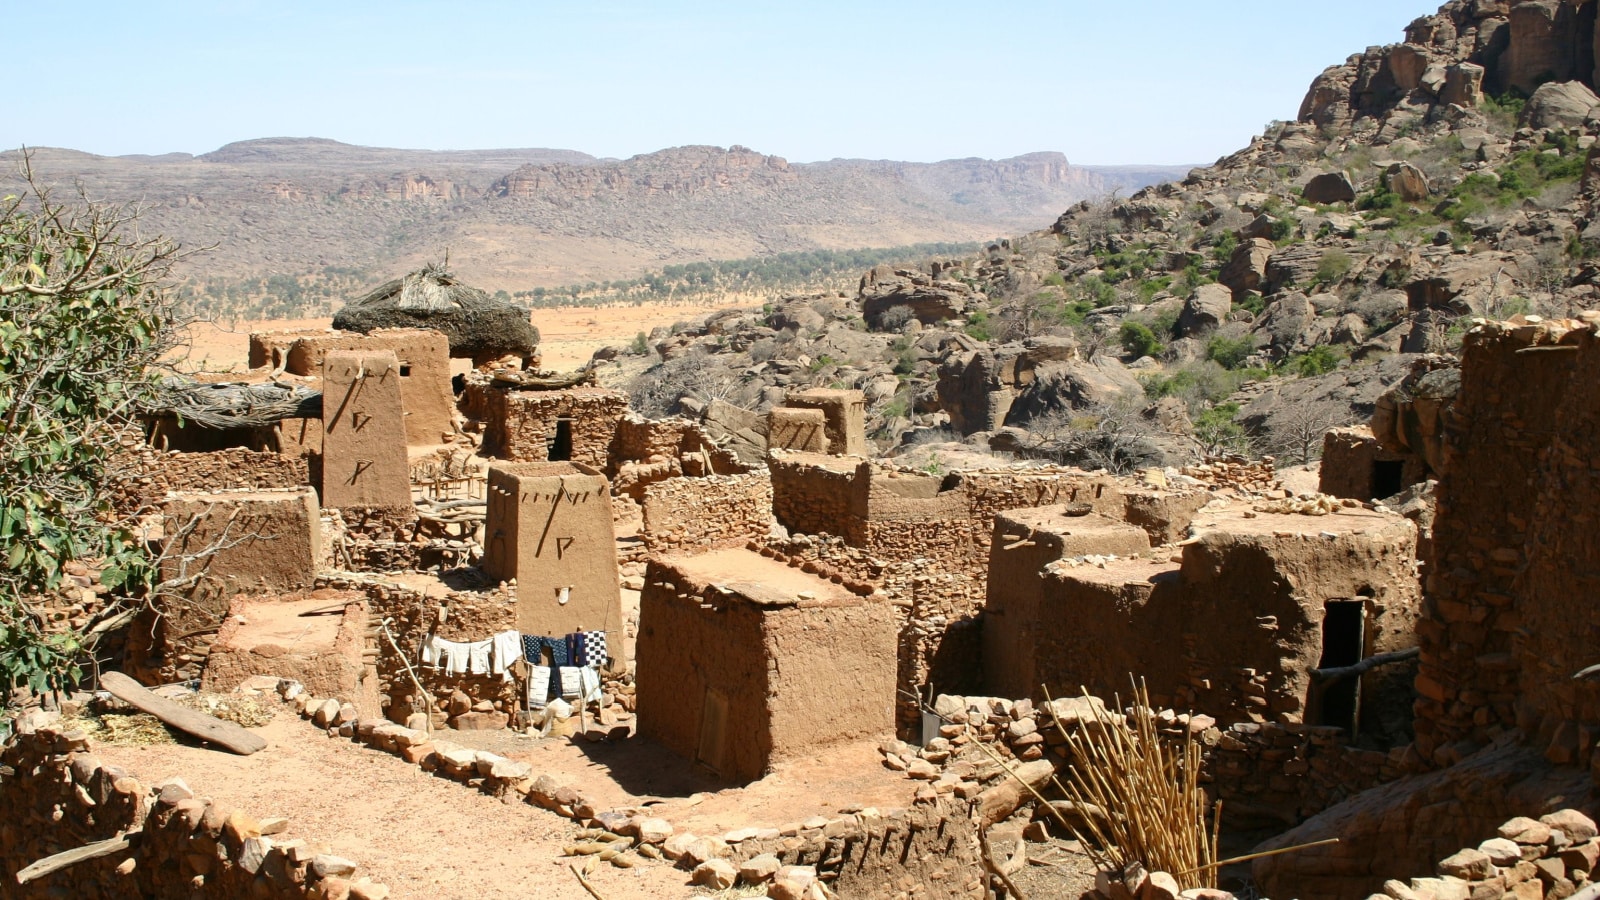 A typical Dogon city of mud sits on the hillside of the Bandiagara Escarpment of Mali, Africa